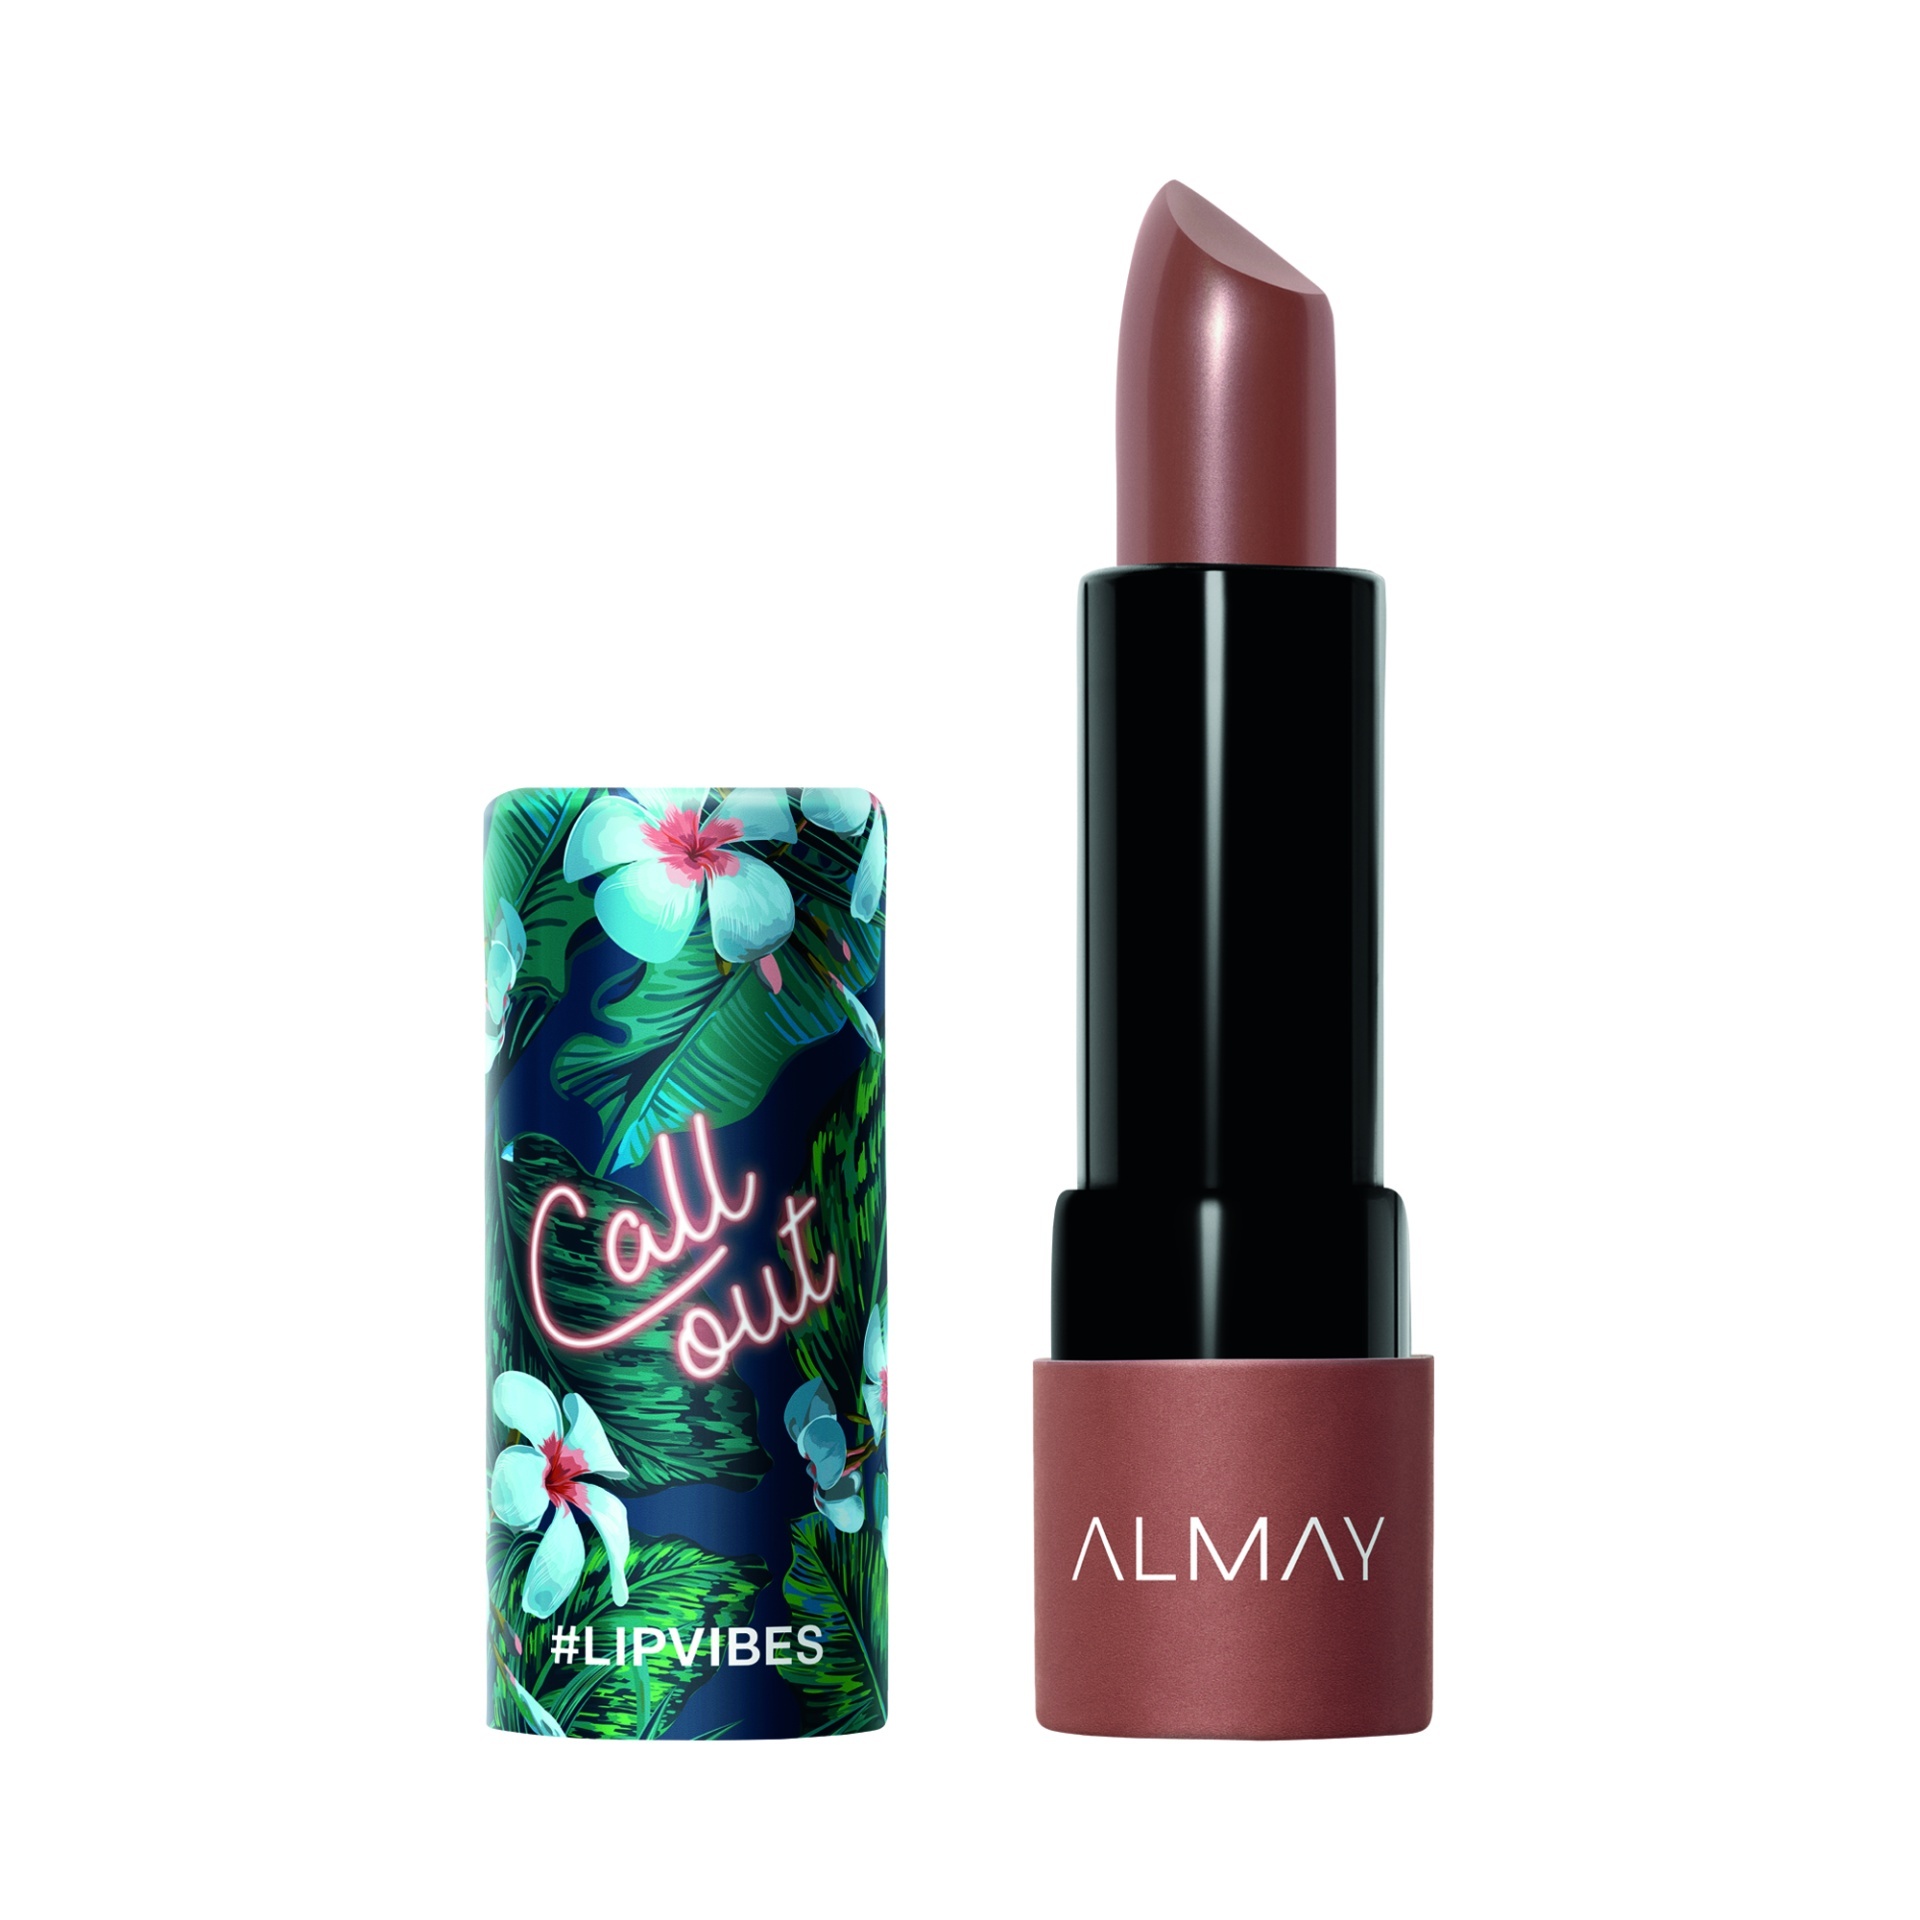 slide 1 of 1, Almay Lip Vibes Matte Lipstick, Call Out, 0.14 oz